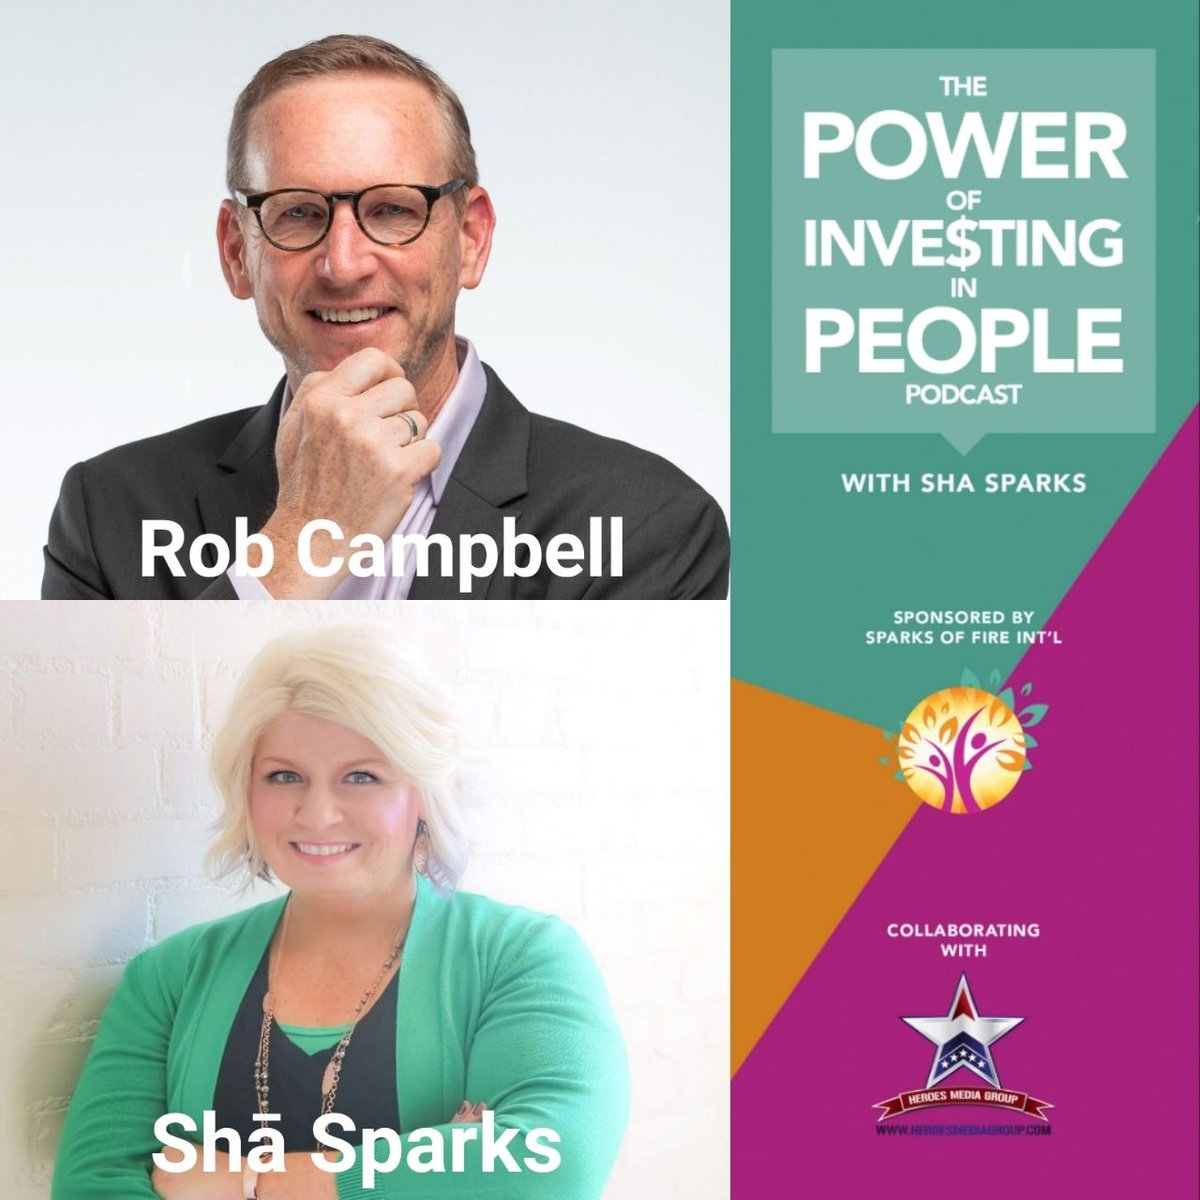 📢 Thank you to @Shā Sparks and @Heroes Media Group  for time invested 💡

Listen to the podcast here: shockyourpotential.com/podcast/an-opt… 

#leadership #coaching #podcast #heroesmediagroup #robcampbellleadership #shockyourpotential